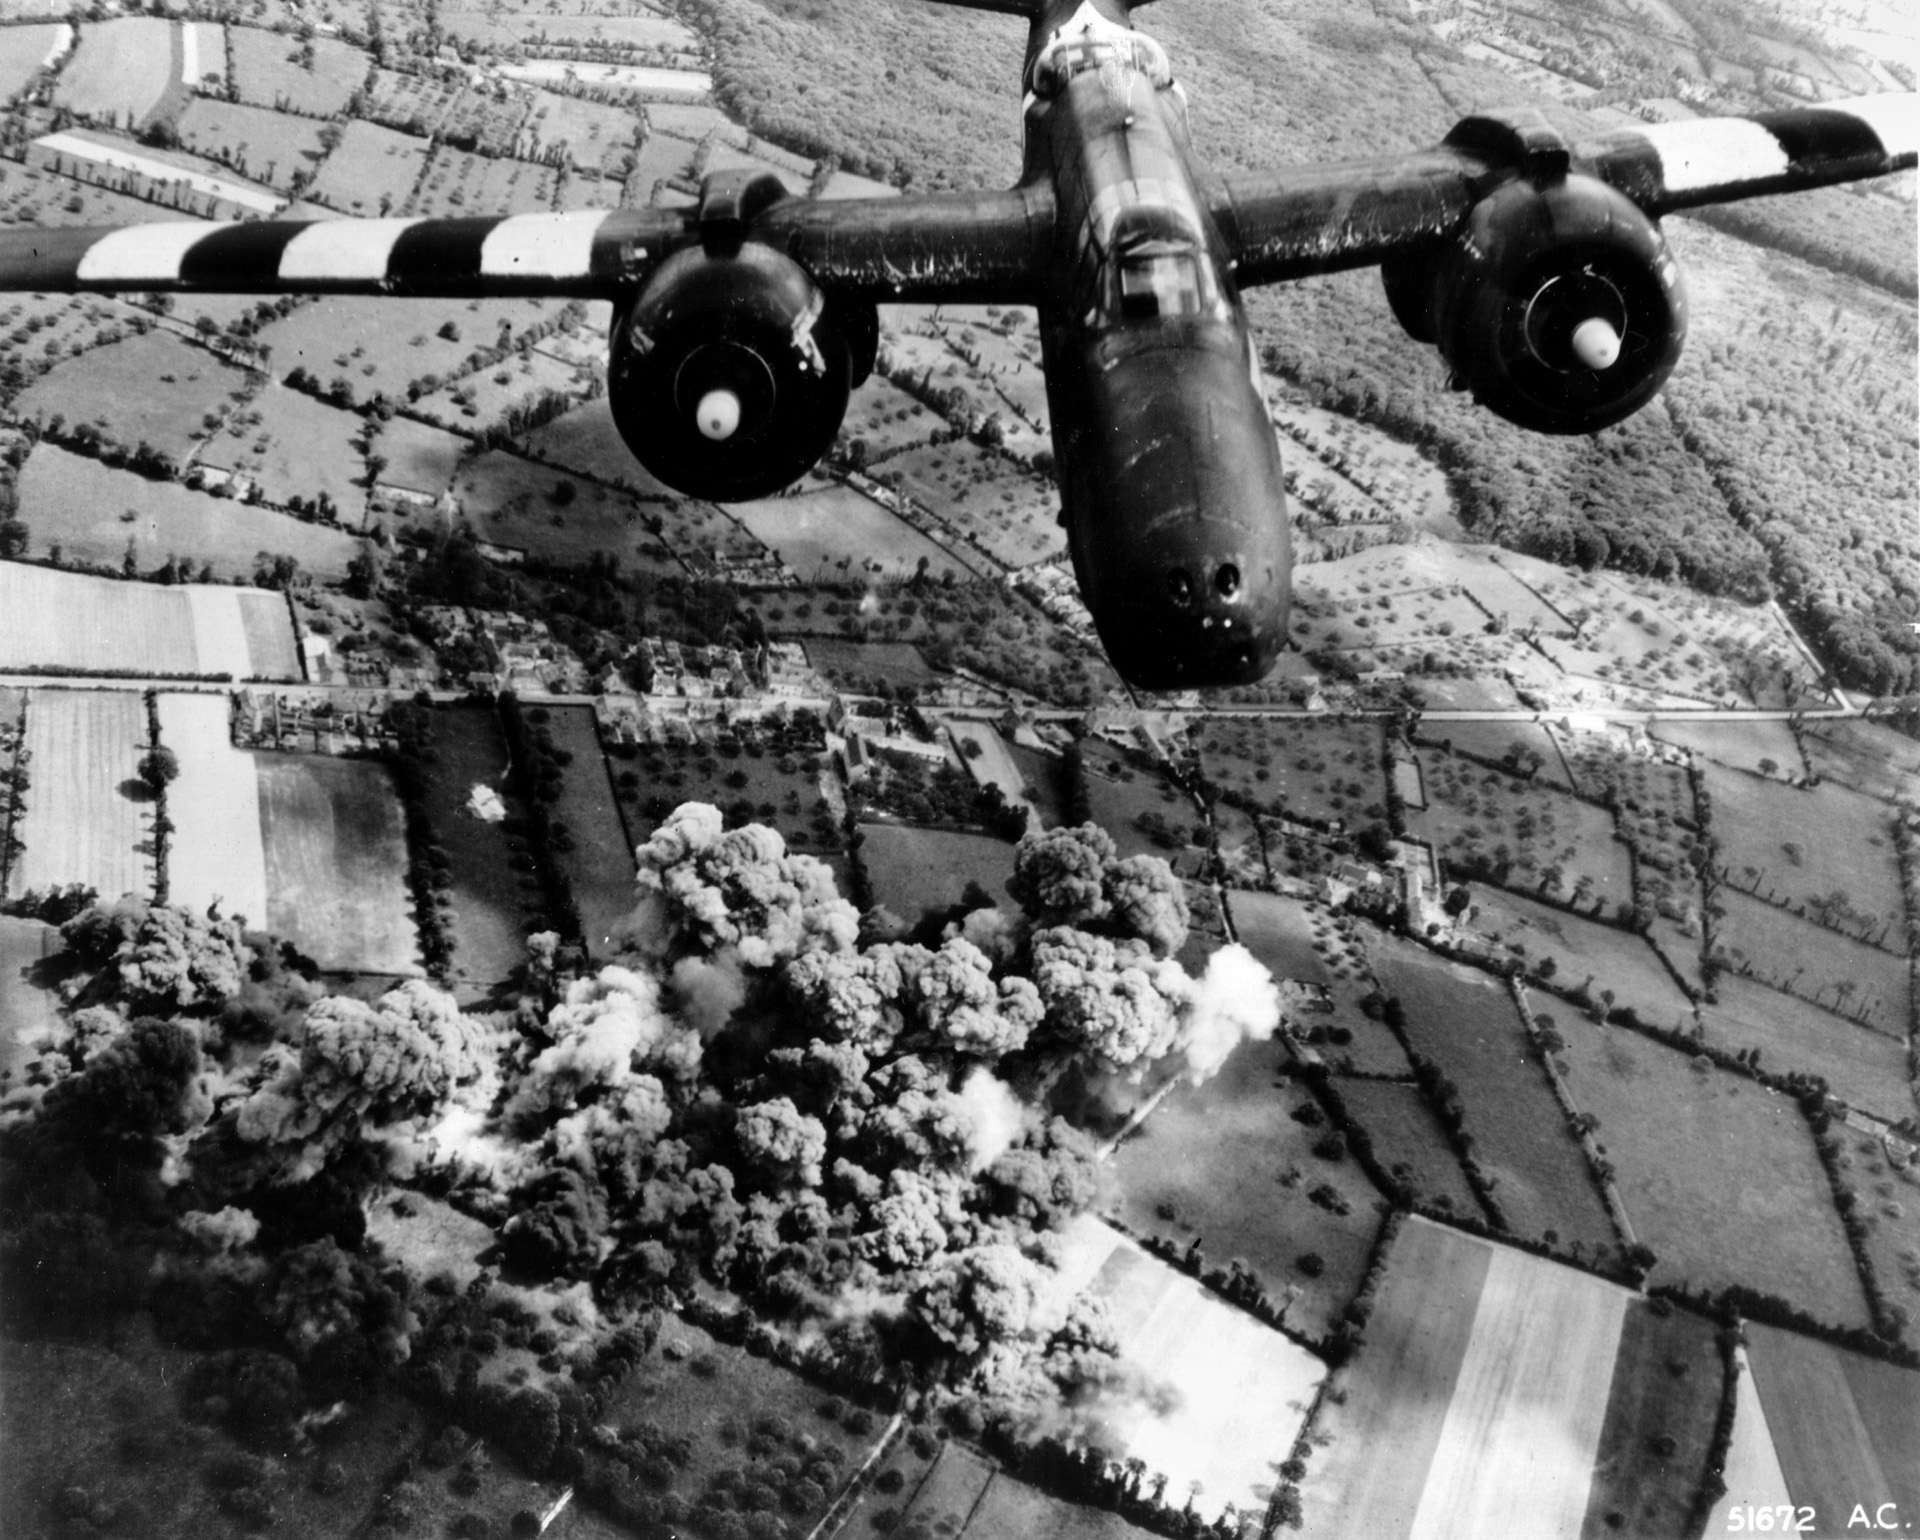 Douglas A-20 Havoc bombers complete their runs against the headquarters of General Dietrich Krauss, commander of the German 352nd Infantry Division in France on June 7, 1944, the day after the Allied landings in Normandy.